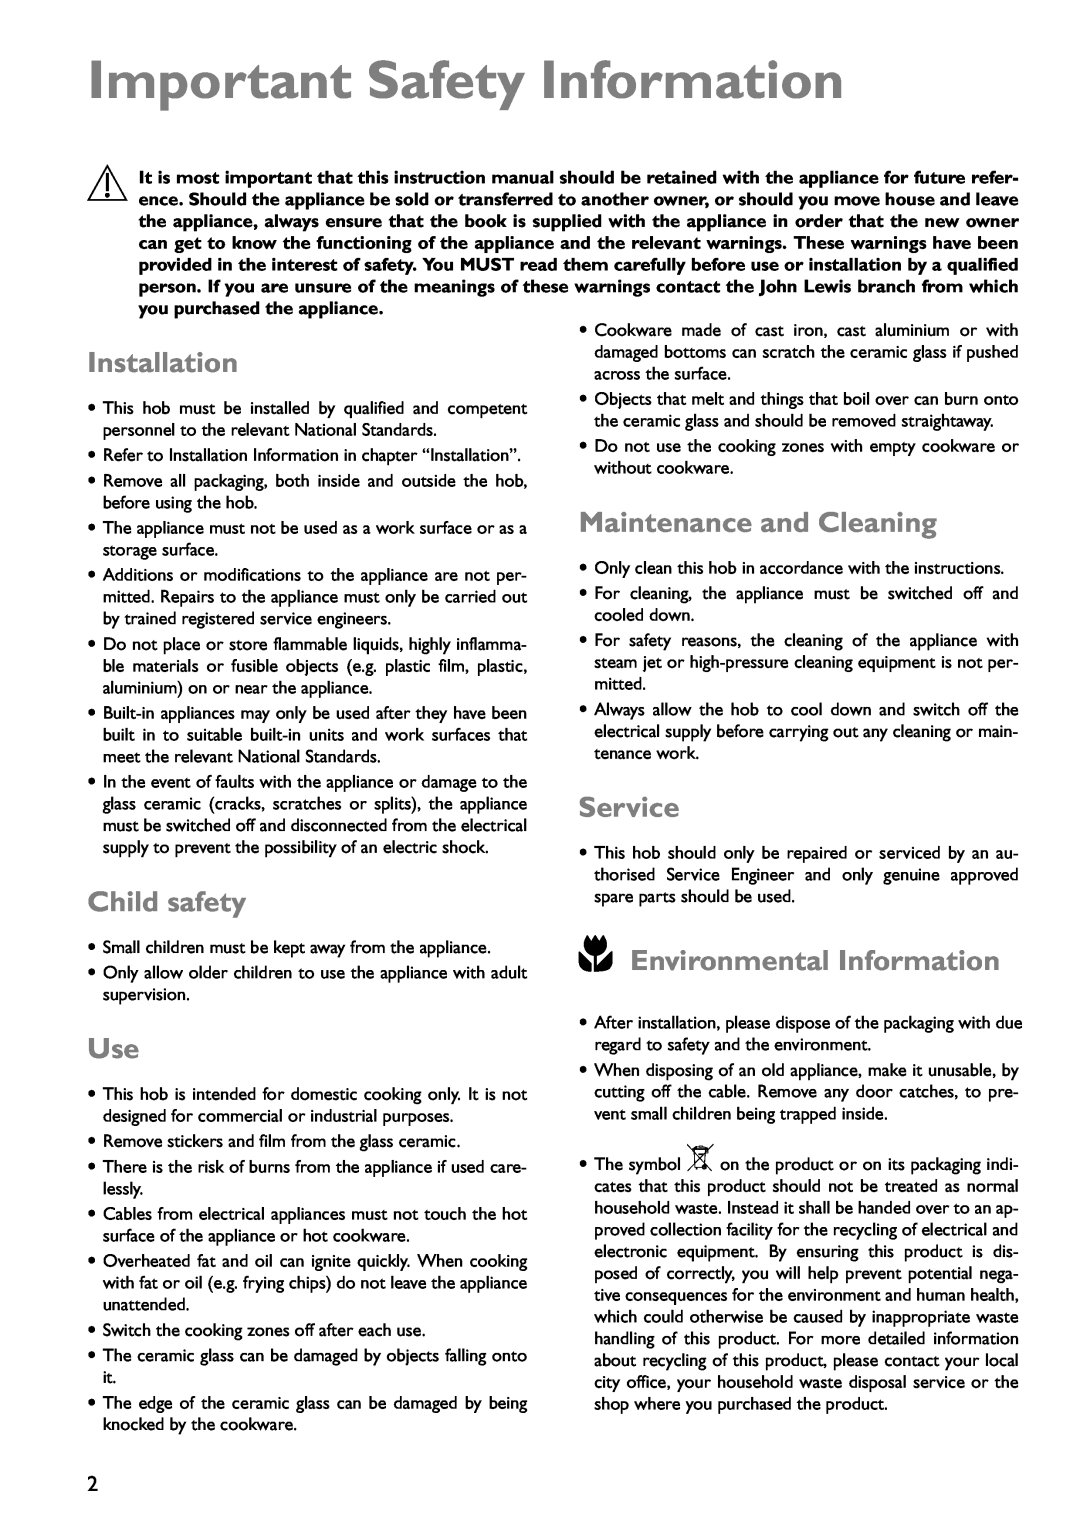 John Lewis JLBICH602 Important Safety Information, Installation, Child safety, Maintenance and Cleaning, Service 